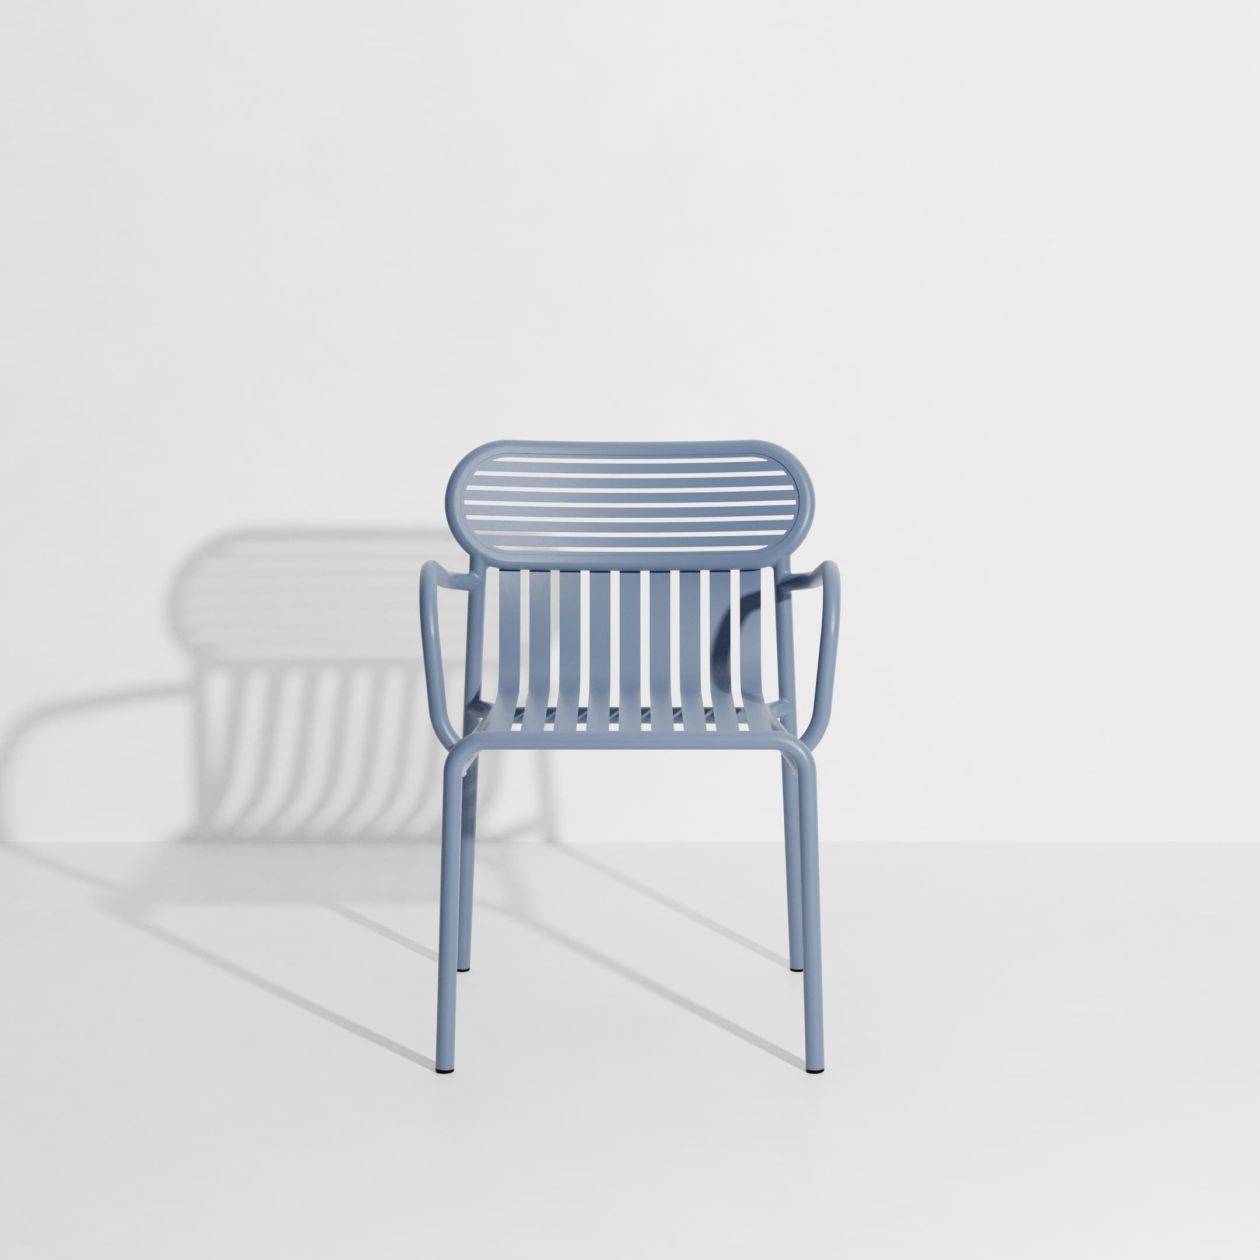 Week-End Garden Chair with armrests - Blue pigeon